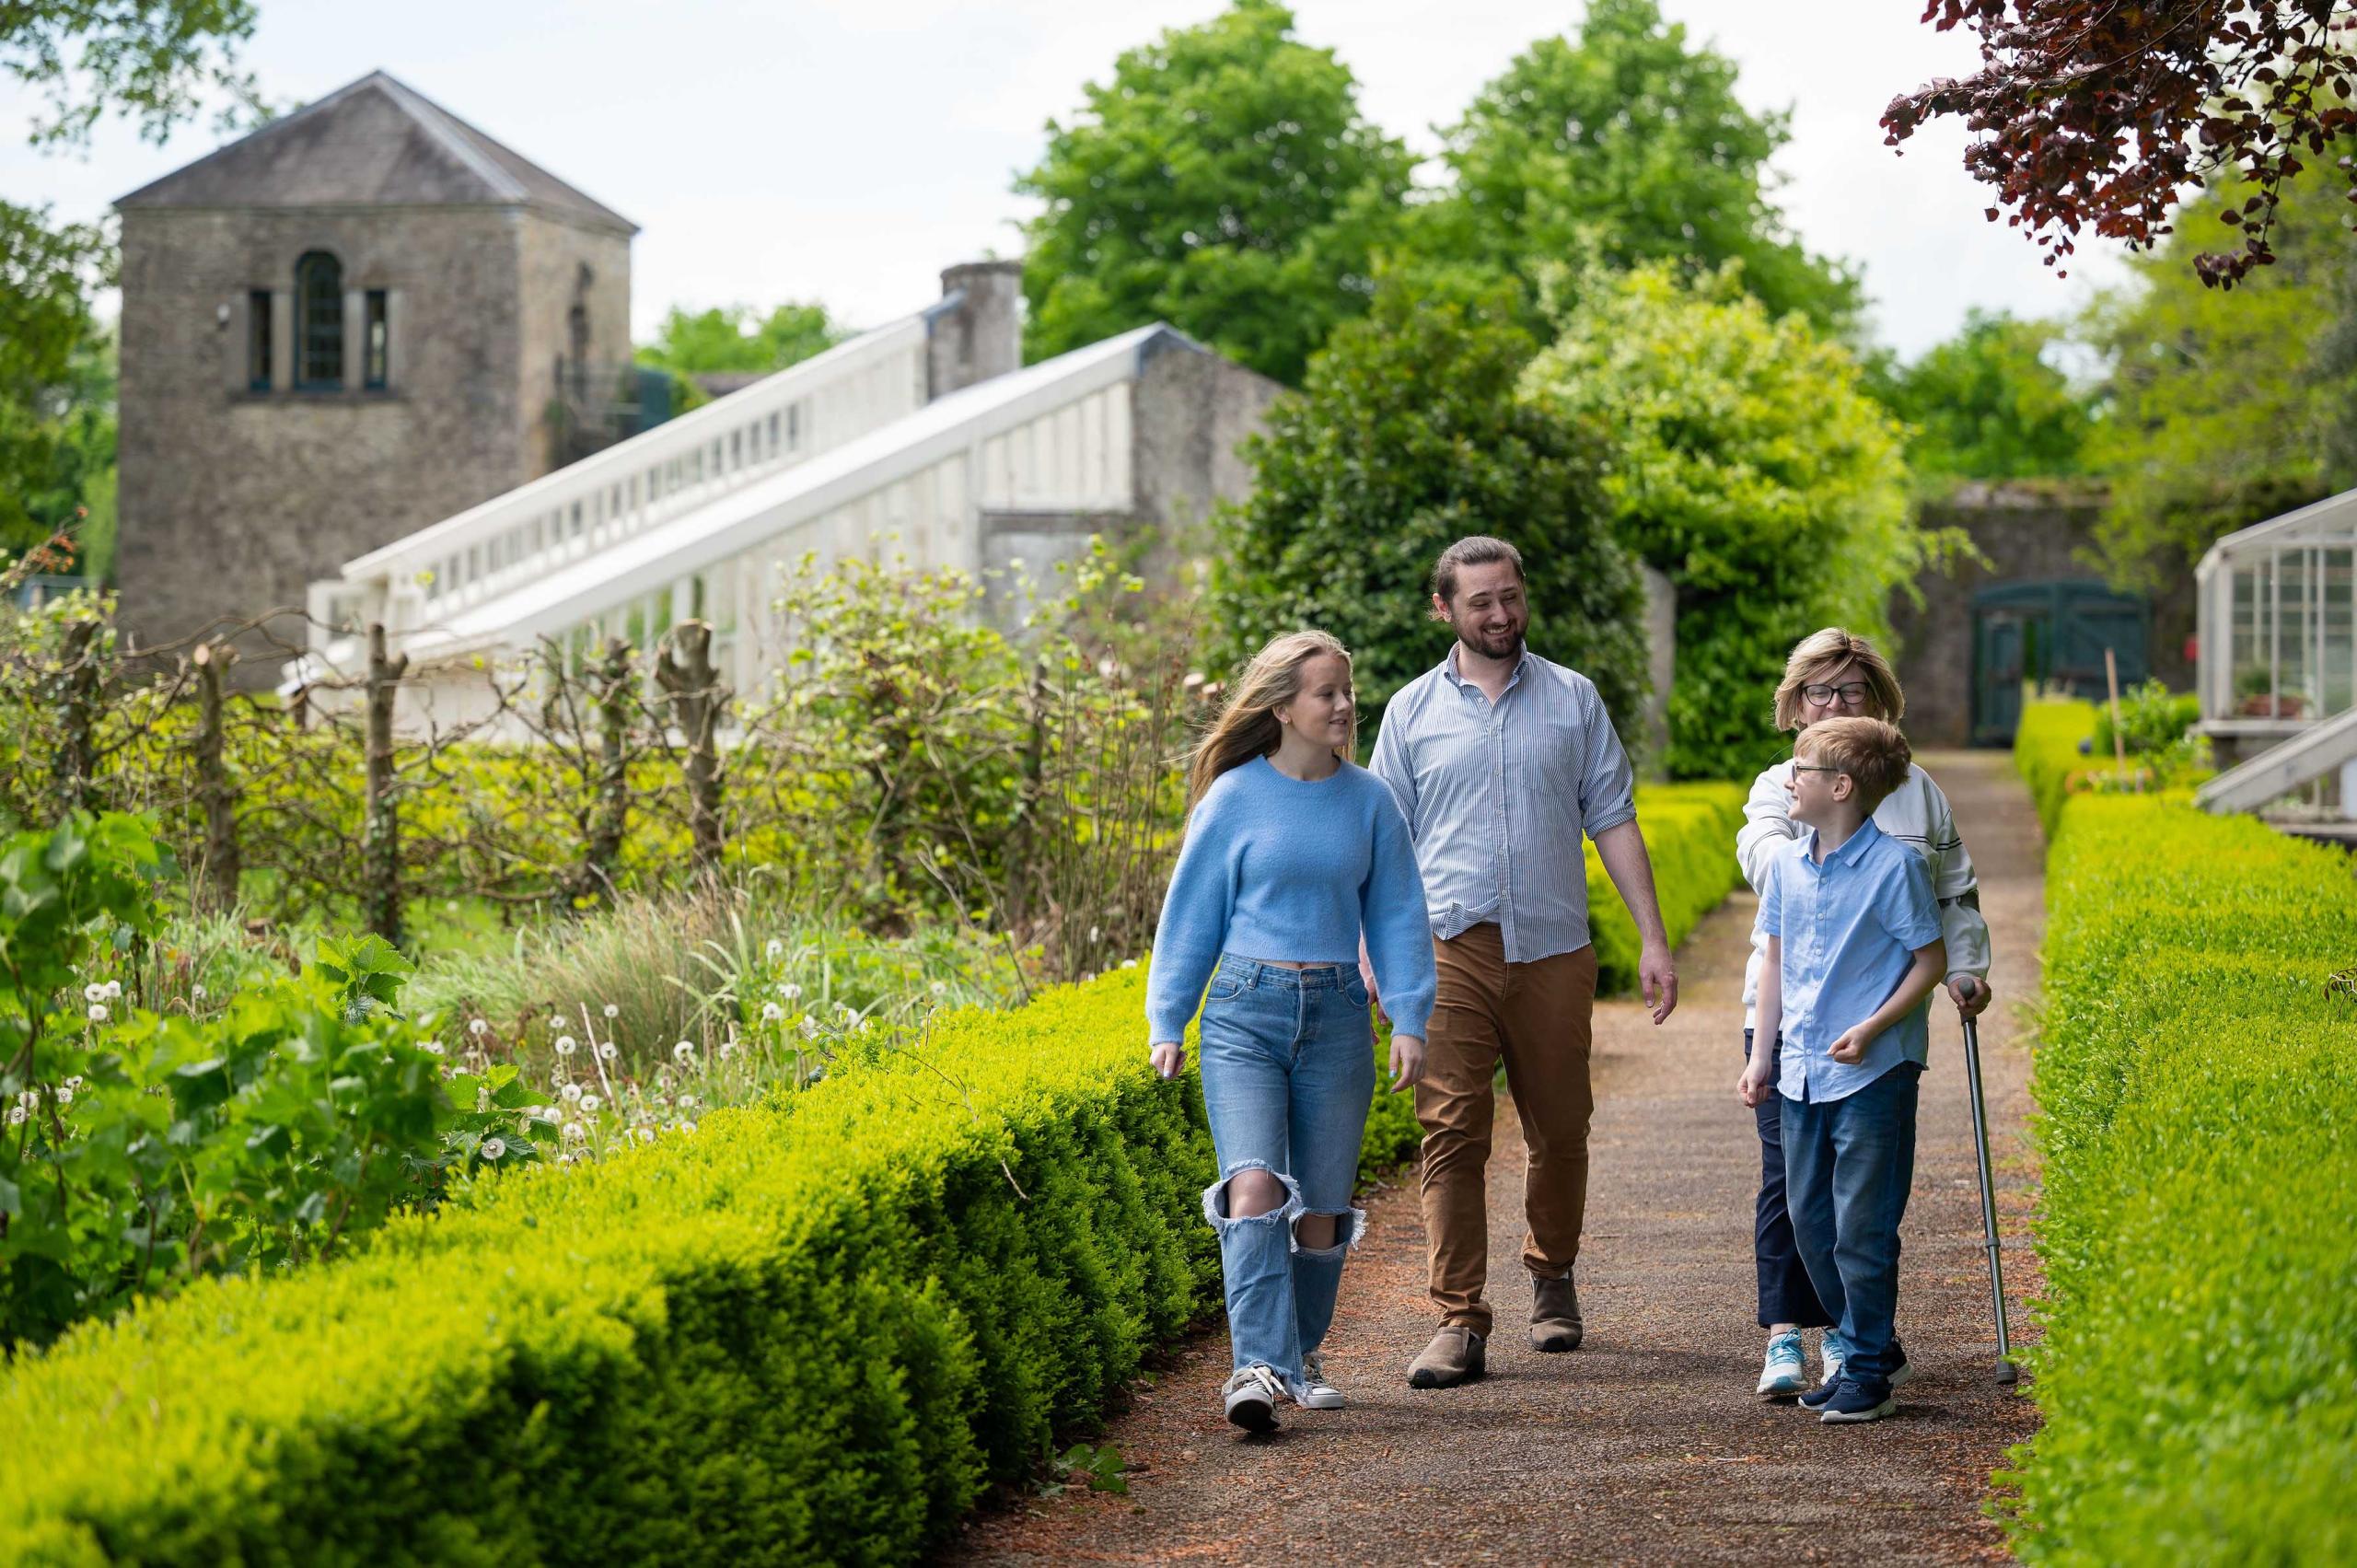 A family of four people walking in gardens with gazebo tower and historic glasshouse in background